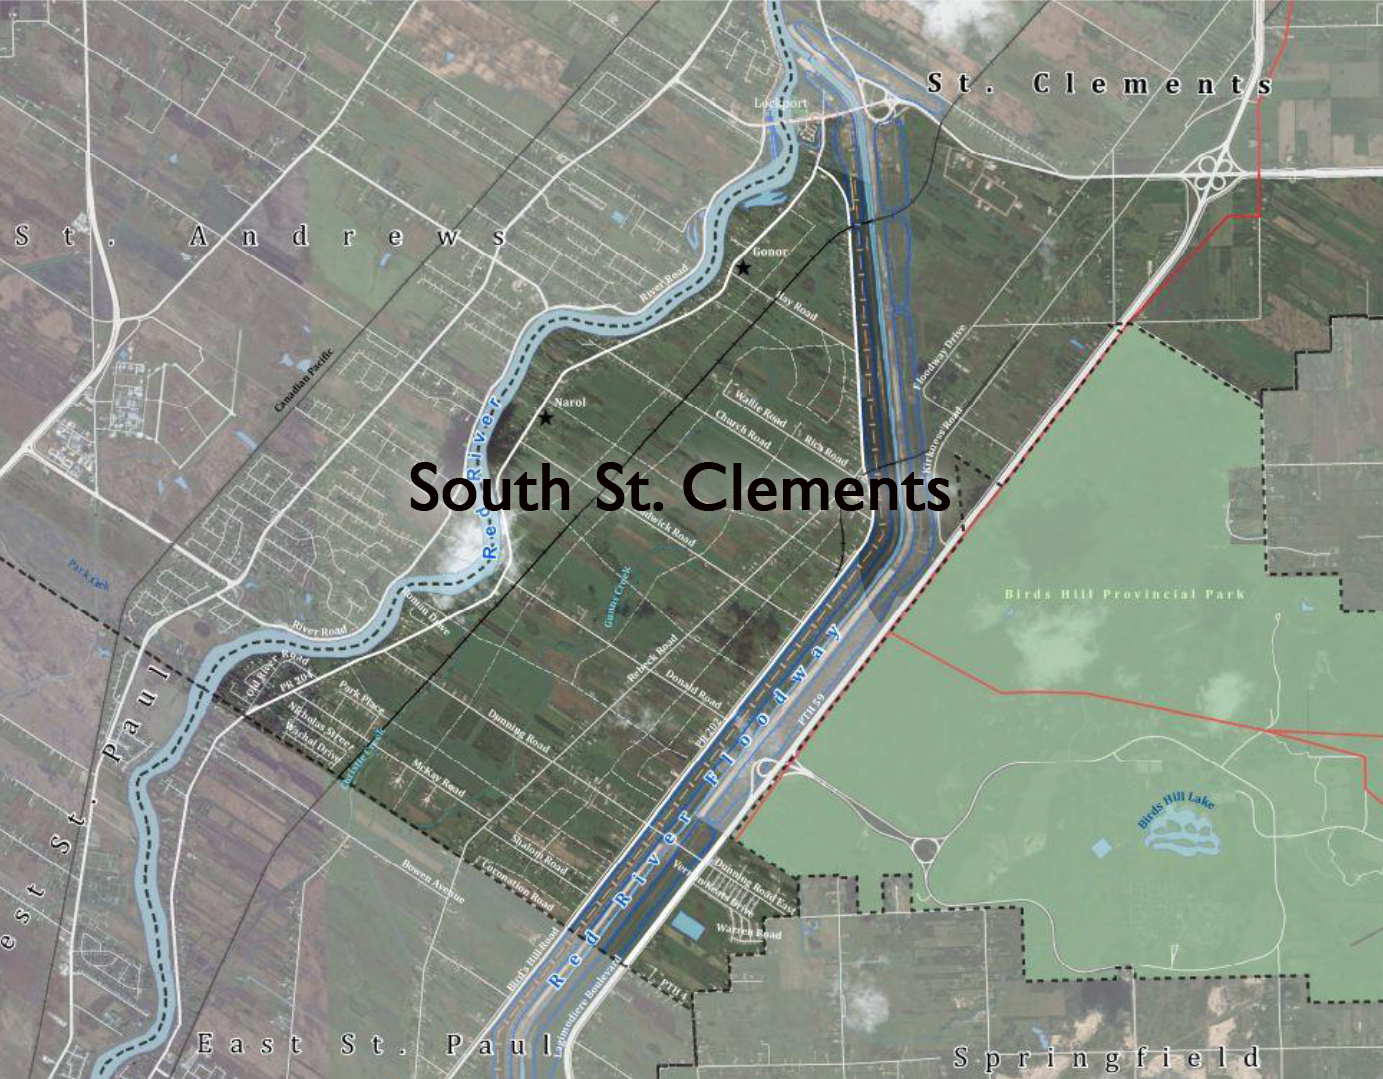 South St. Clements map